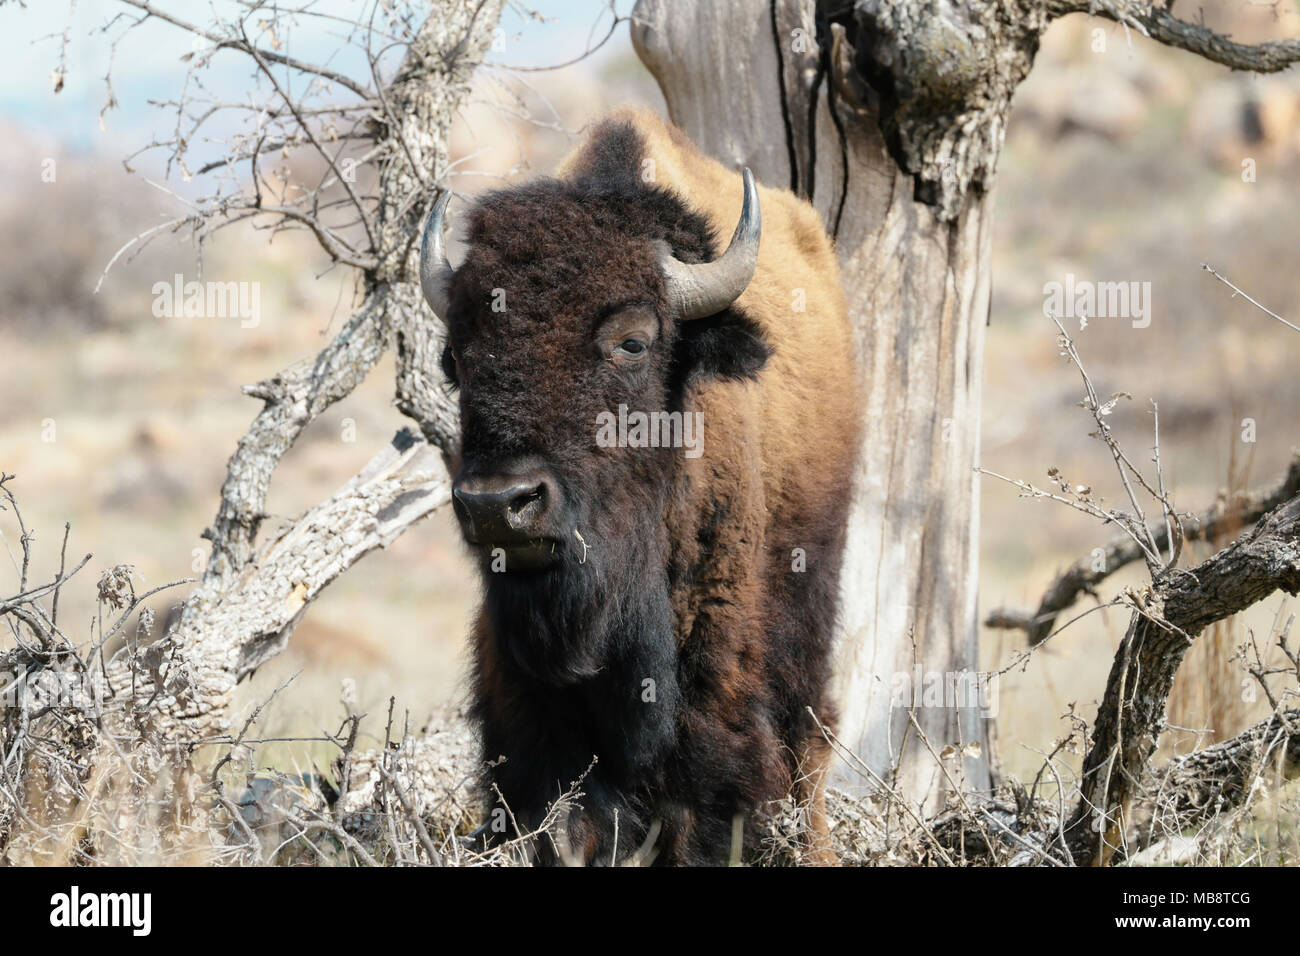 Buffalo is standing in thick brush. Stock Photo